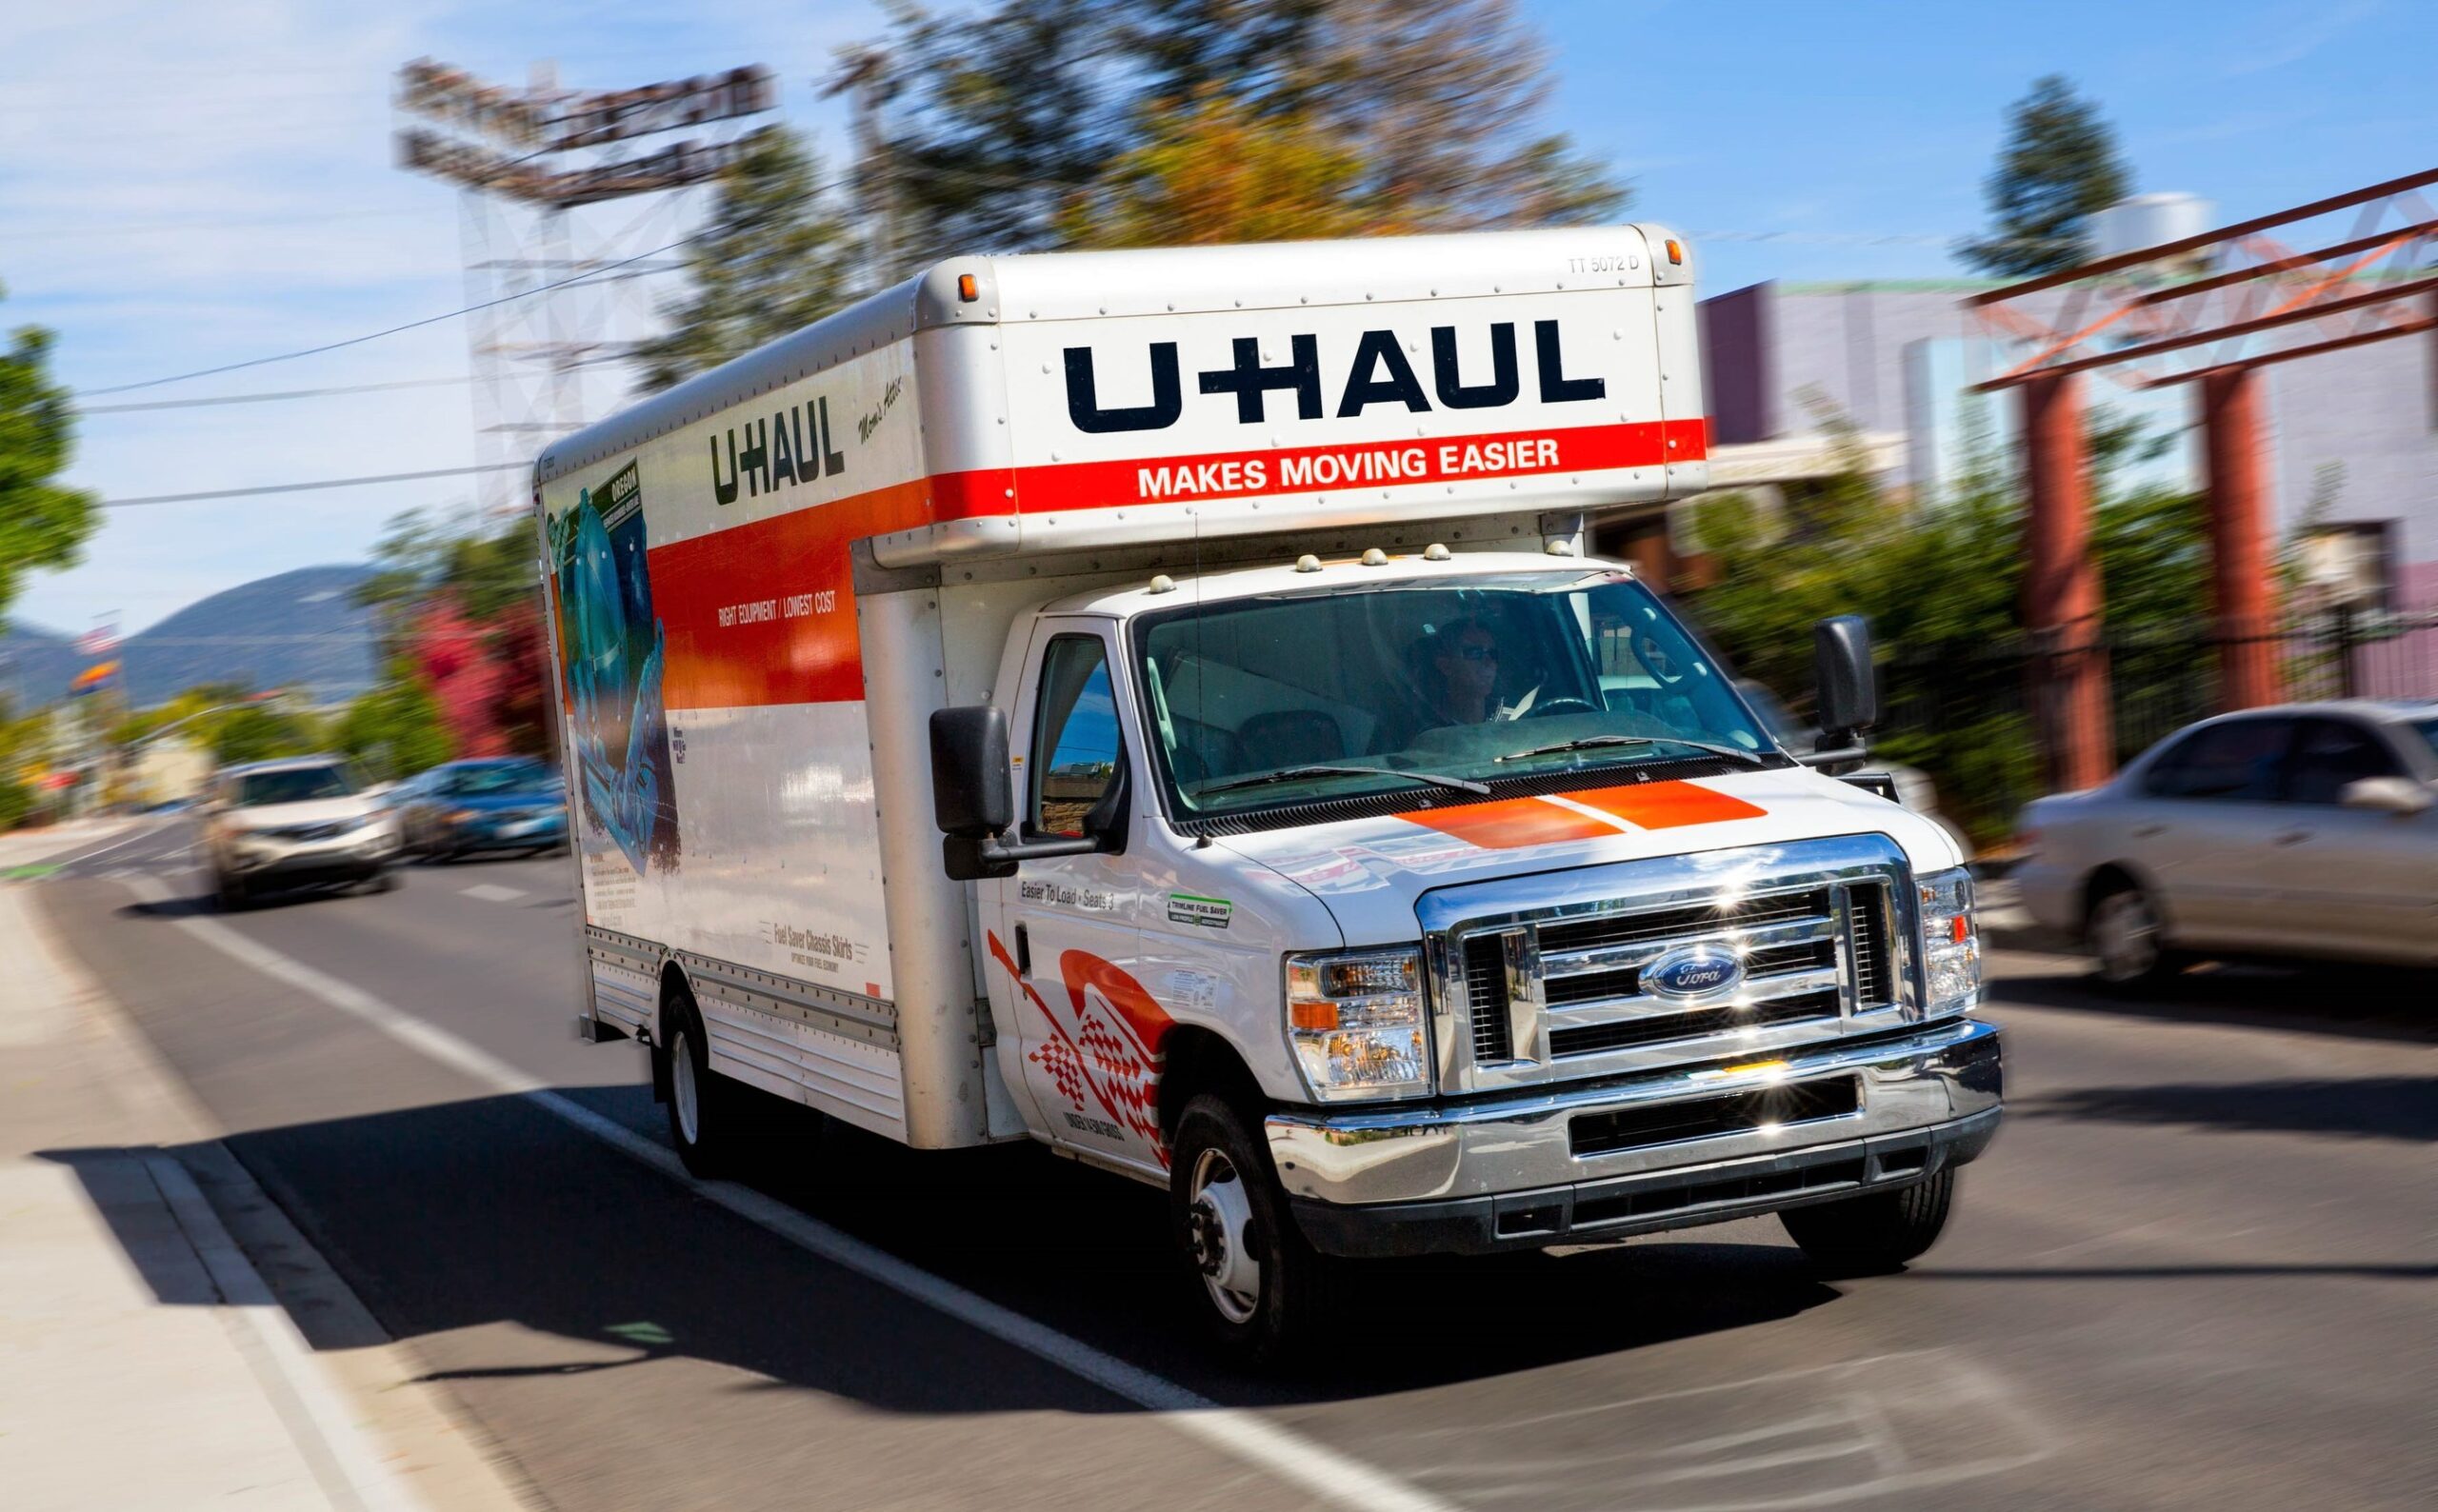 U-Haul rental truck on the road on a sunny day - Edwardsville, IL